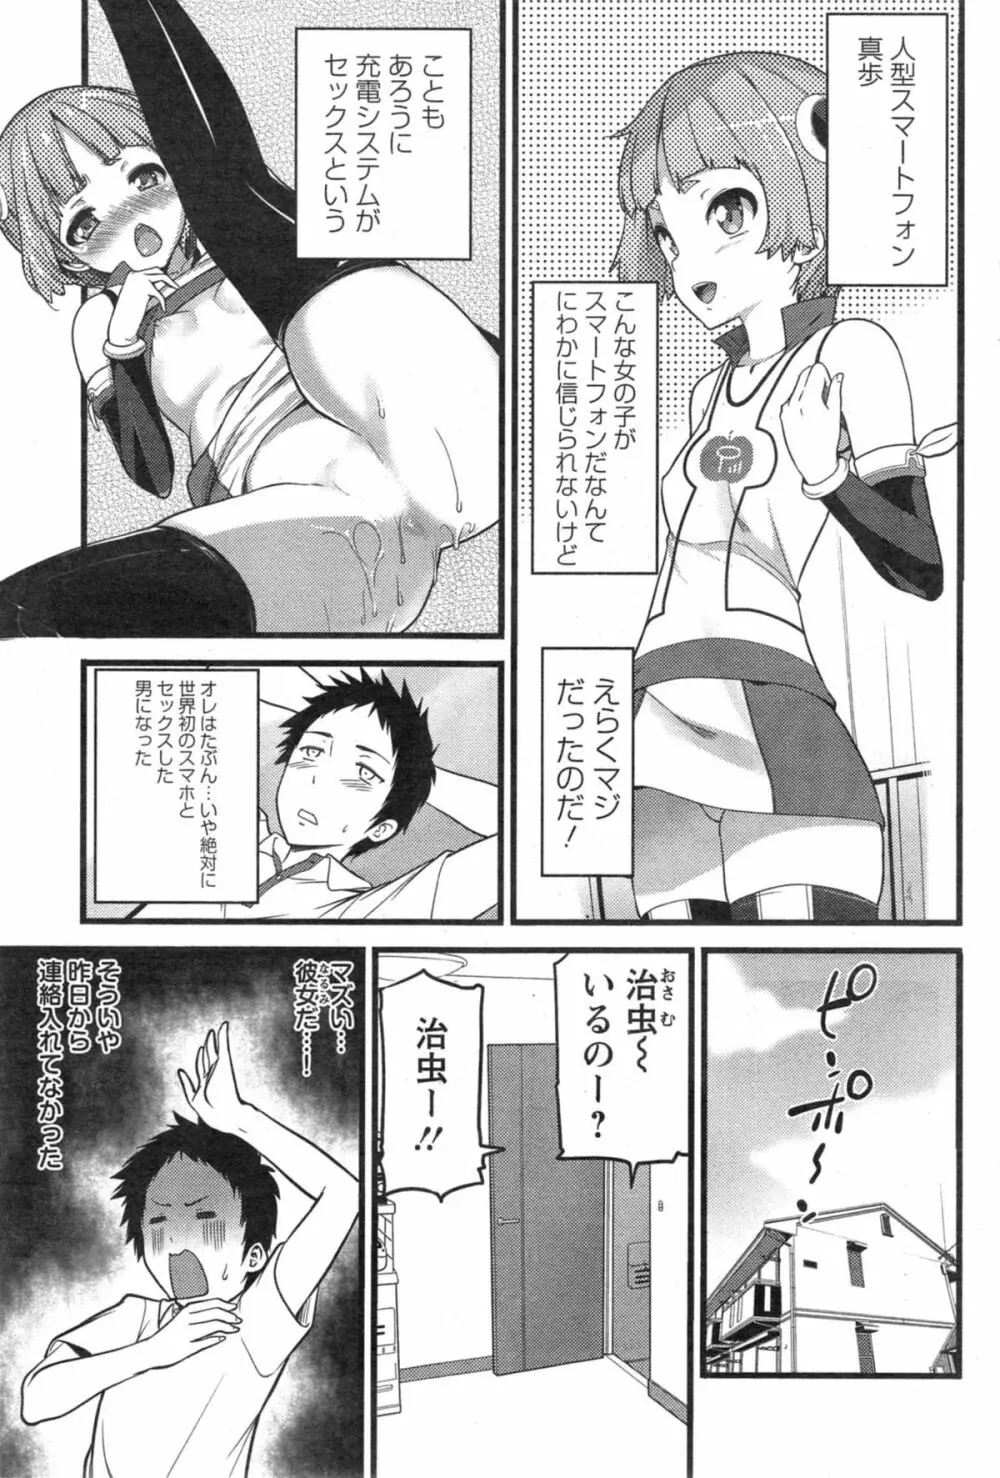 Pear Phone 第1-2章 Page.19